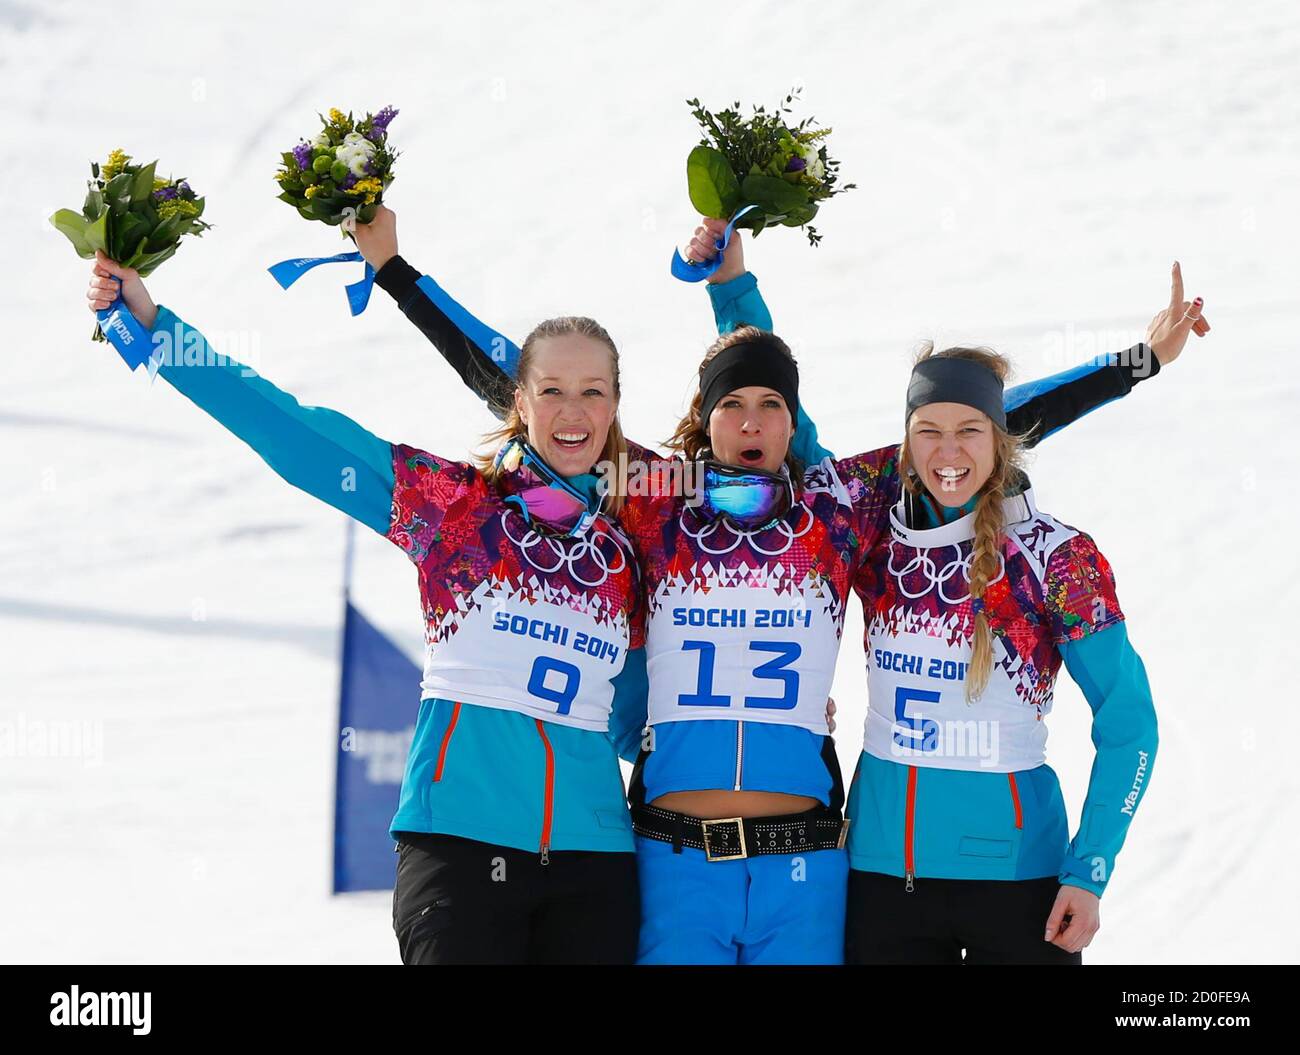 to R) Germany's second-placed Anke Karstens, Austria's first-placed Julia Dujmovits and Germany's third-placed Amelie Kober celebrate on the podium during the flower ceremony for women's parallel slalom snowboard event at